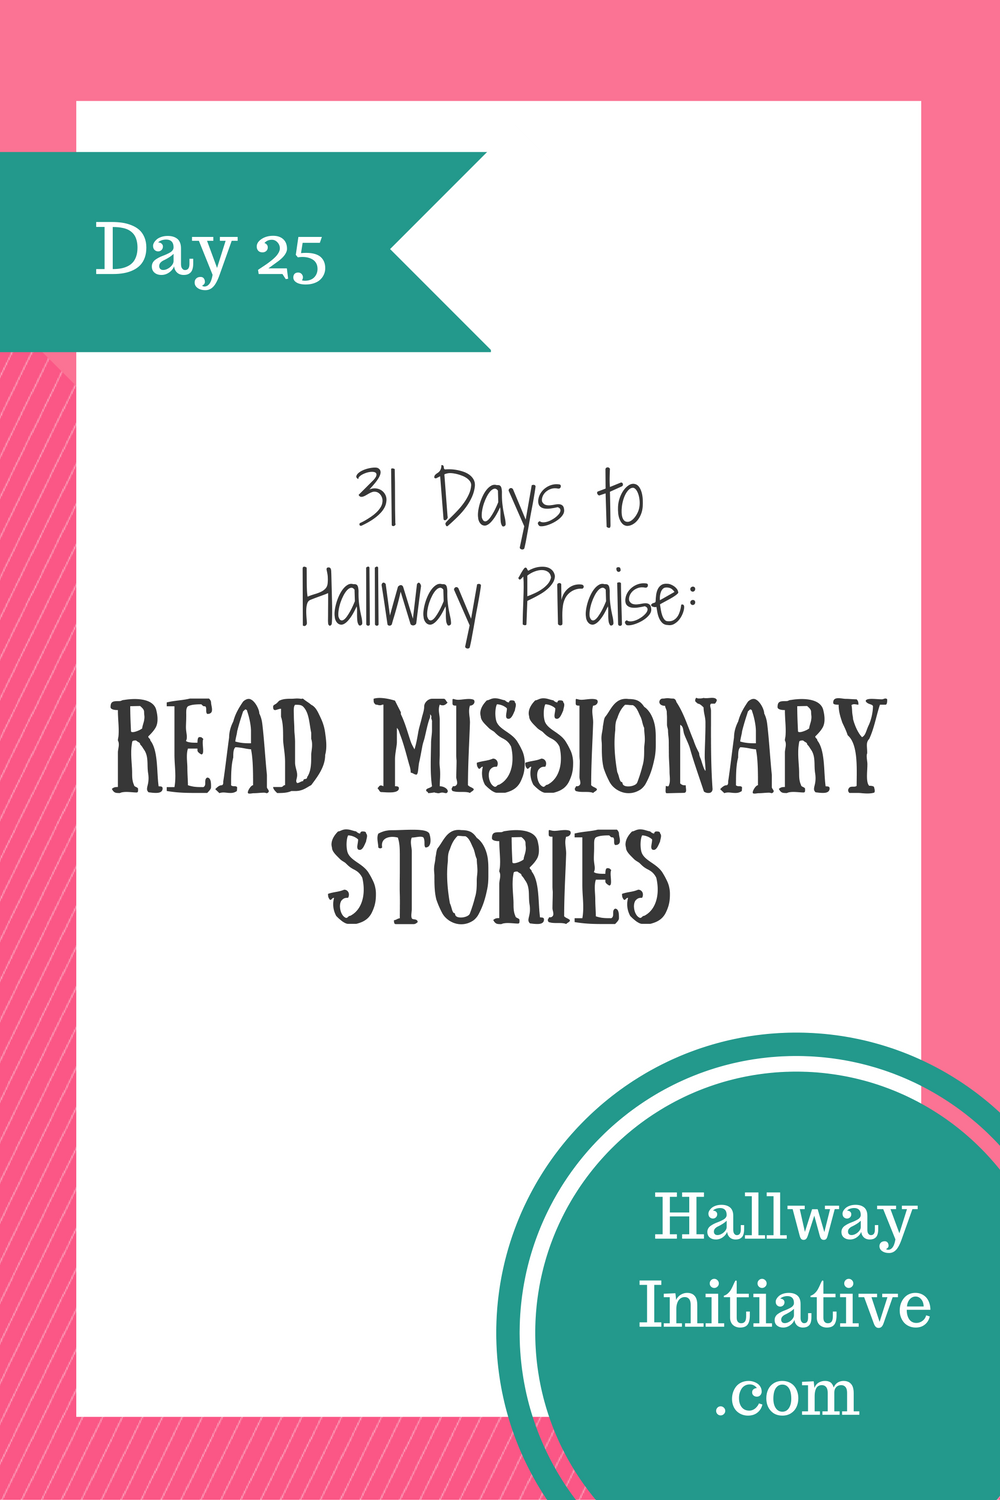 Day 25: read missionary stories